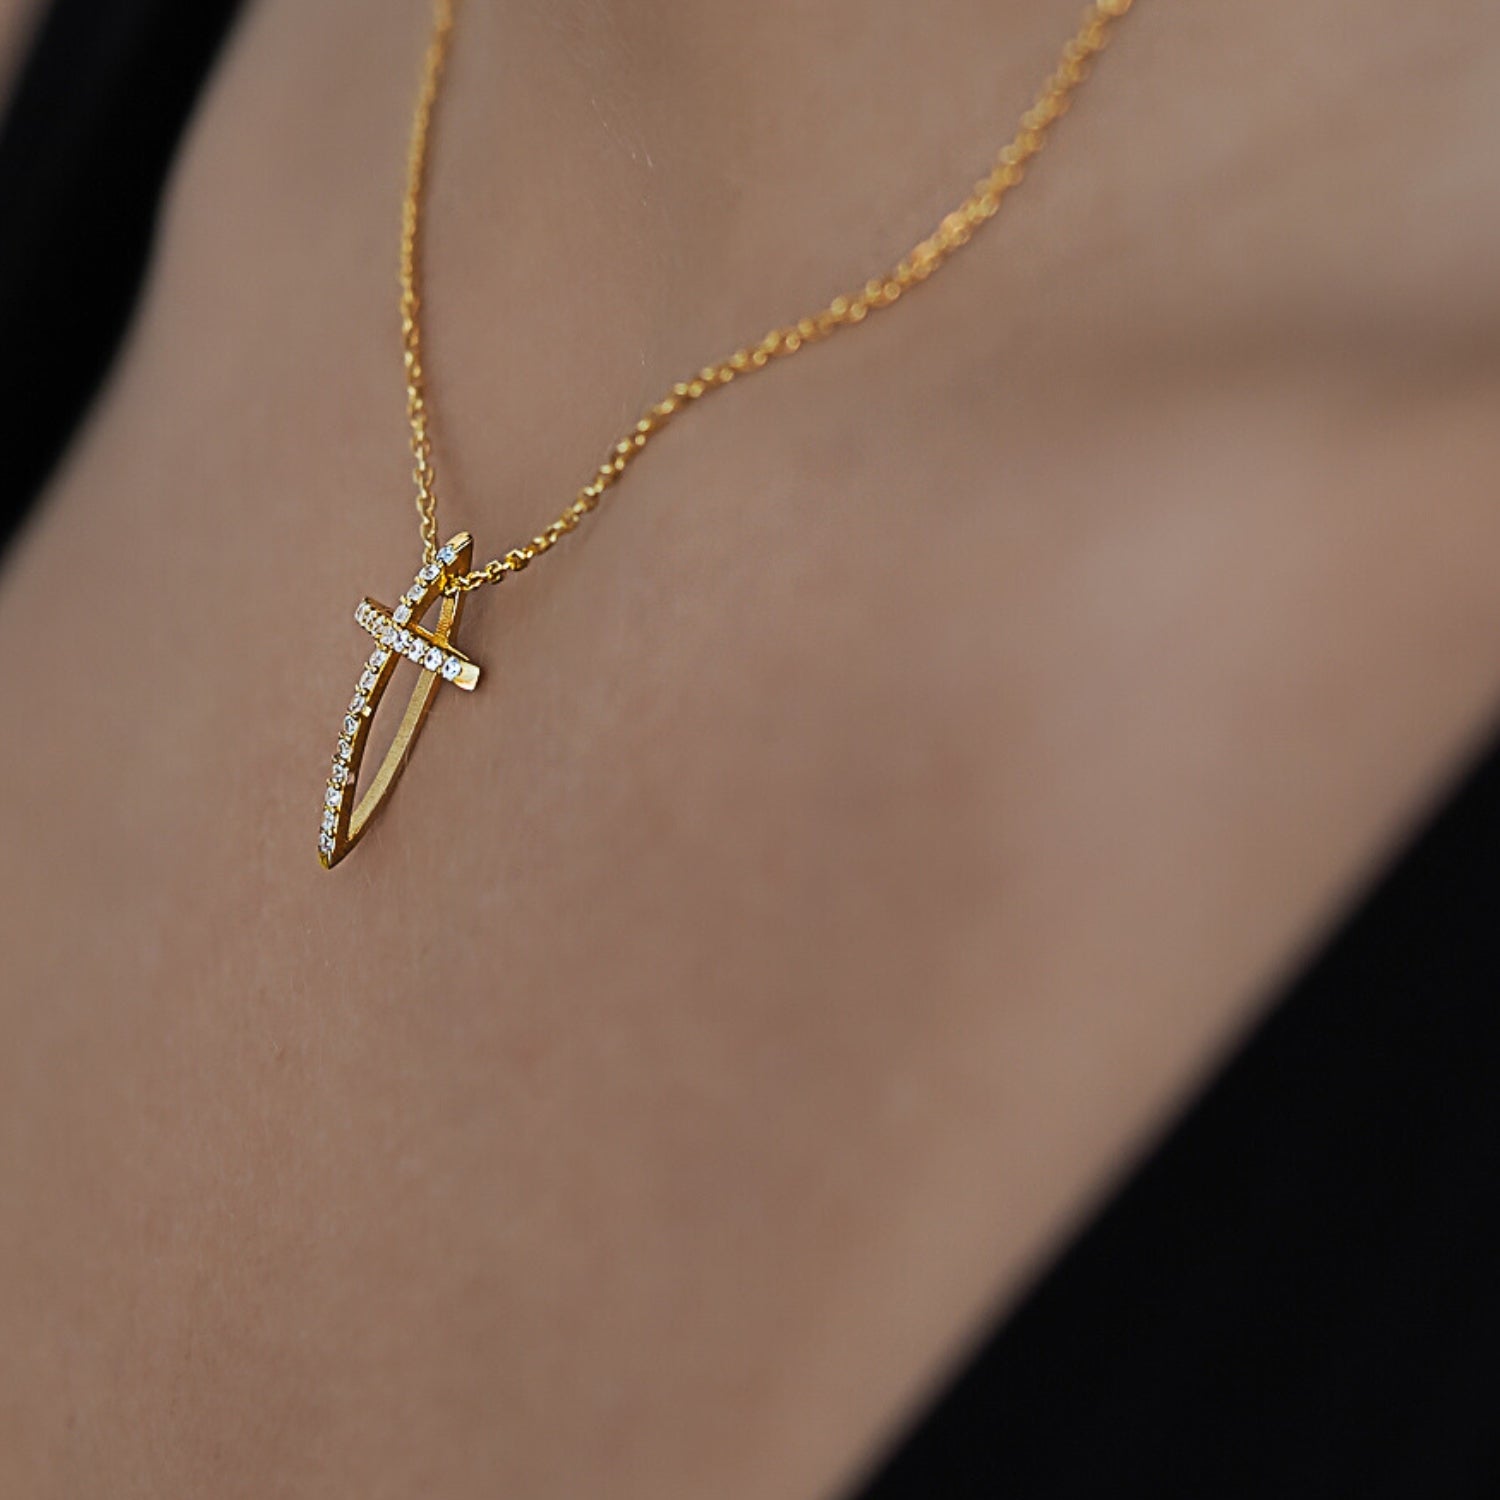 A model wearing the Unique Cross Diamond Necklace, radiating elegance and faith.